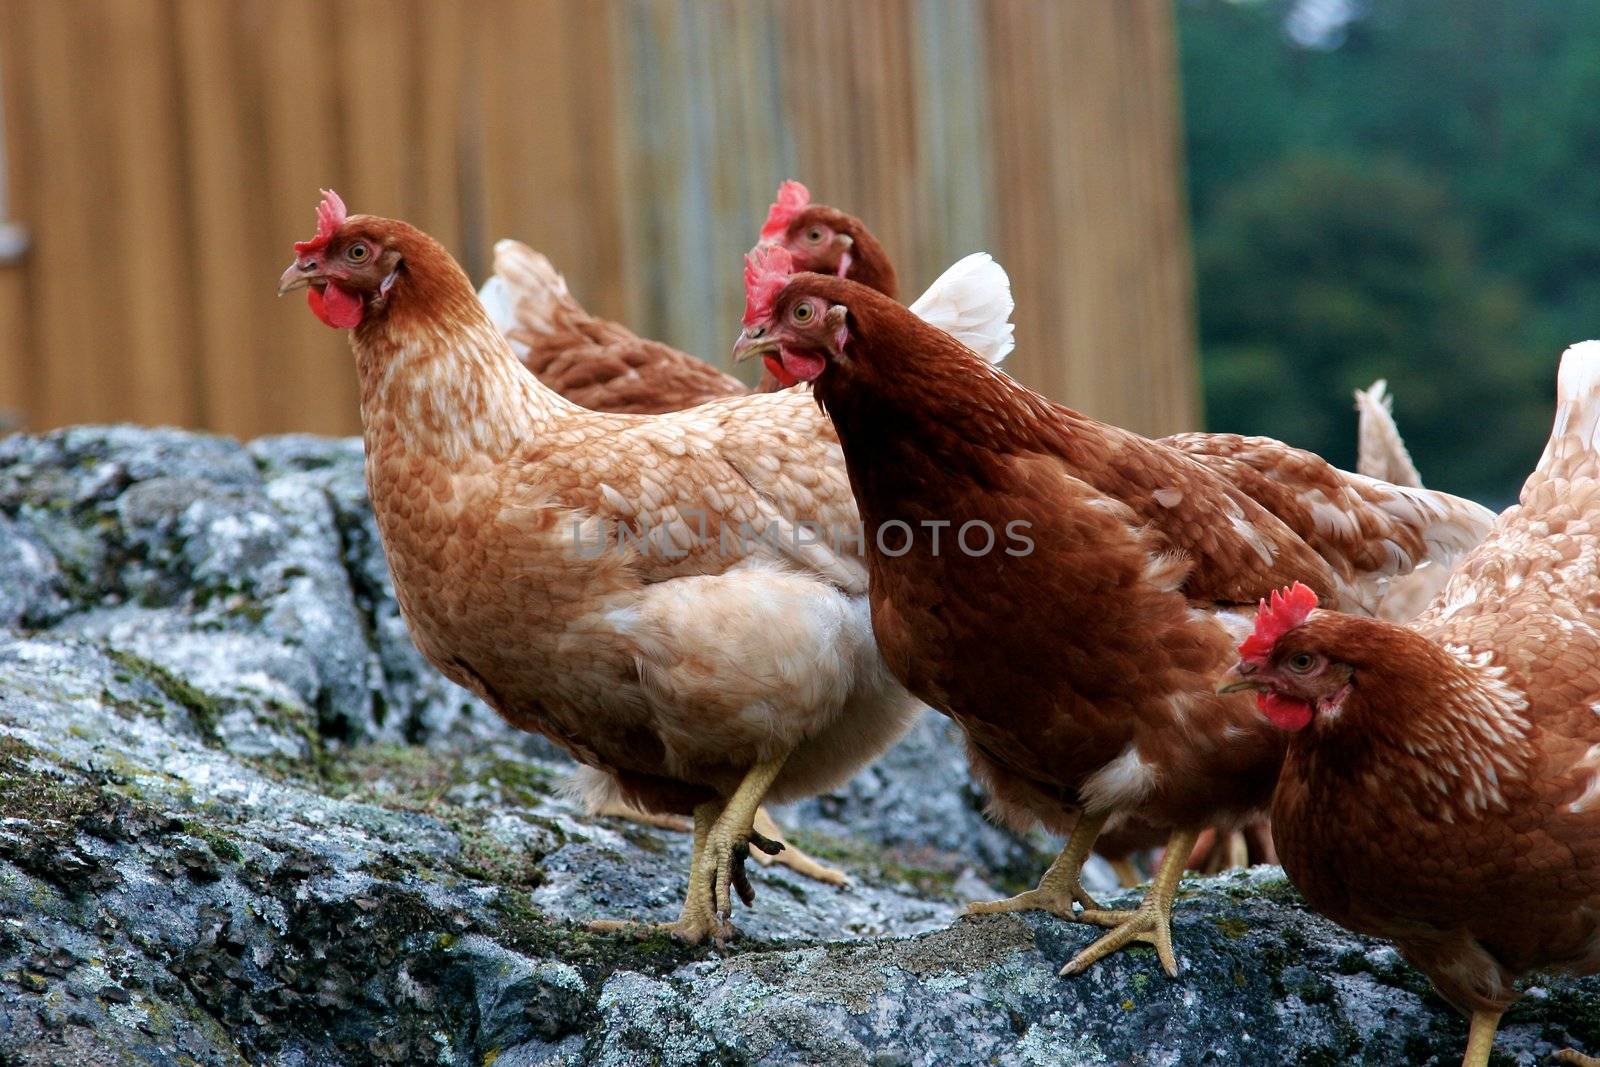 A group of free-range brown hens gathered together, located in a city farm environment. Set on a portrait format.